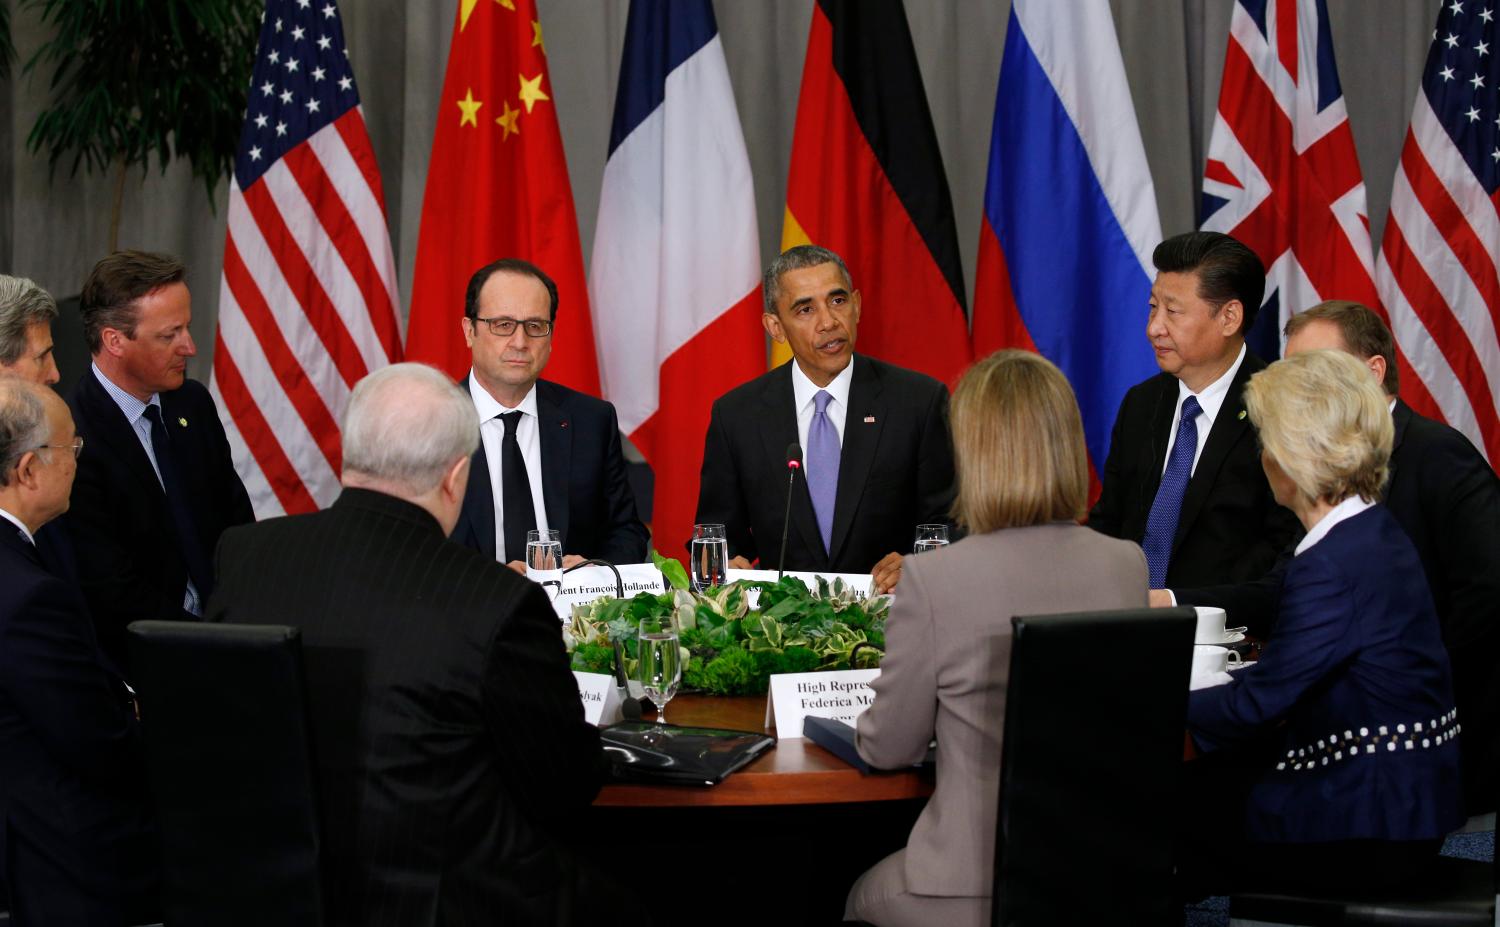 REUTERS/Kevin Lamarque - President Barack Obama hosts members of the P5+1 groupat the Nuclear Security Summit.